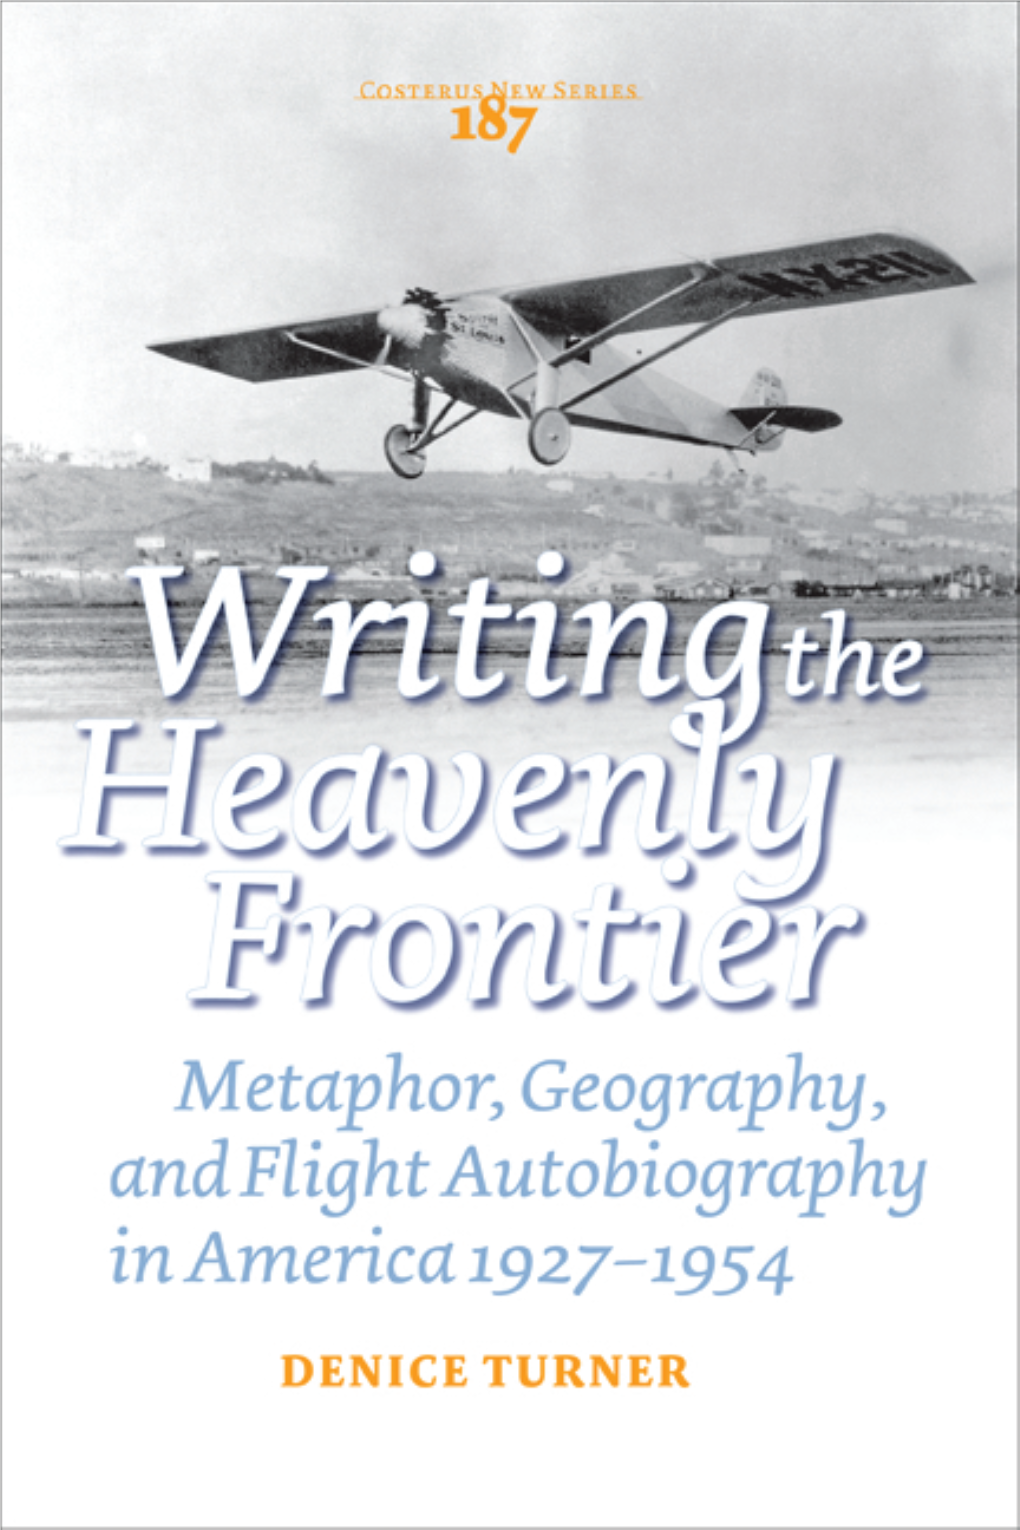 Metaphor, Geography, and Flight Autobiography in America 1927-1954